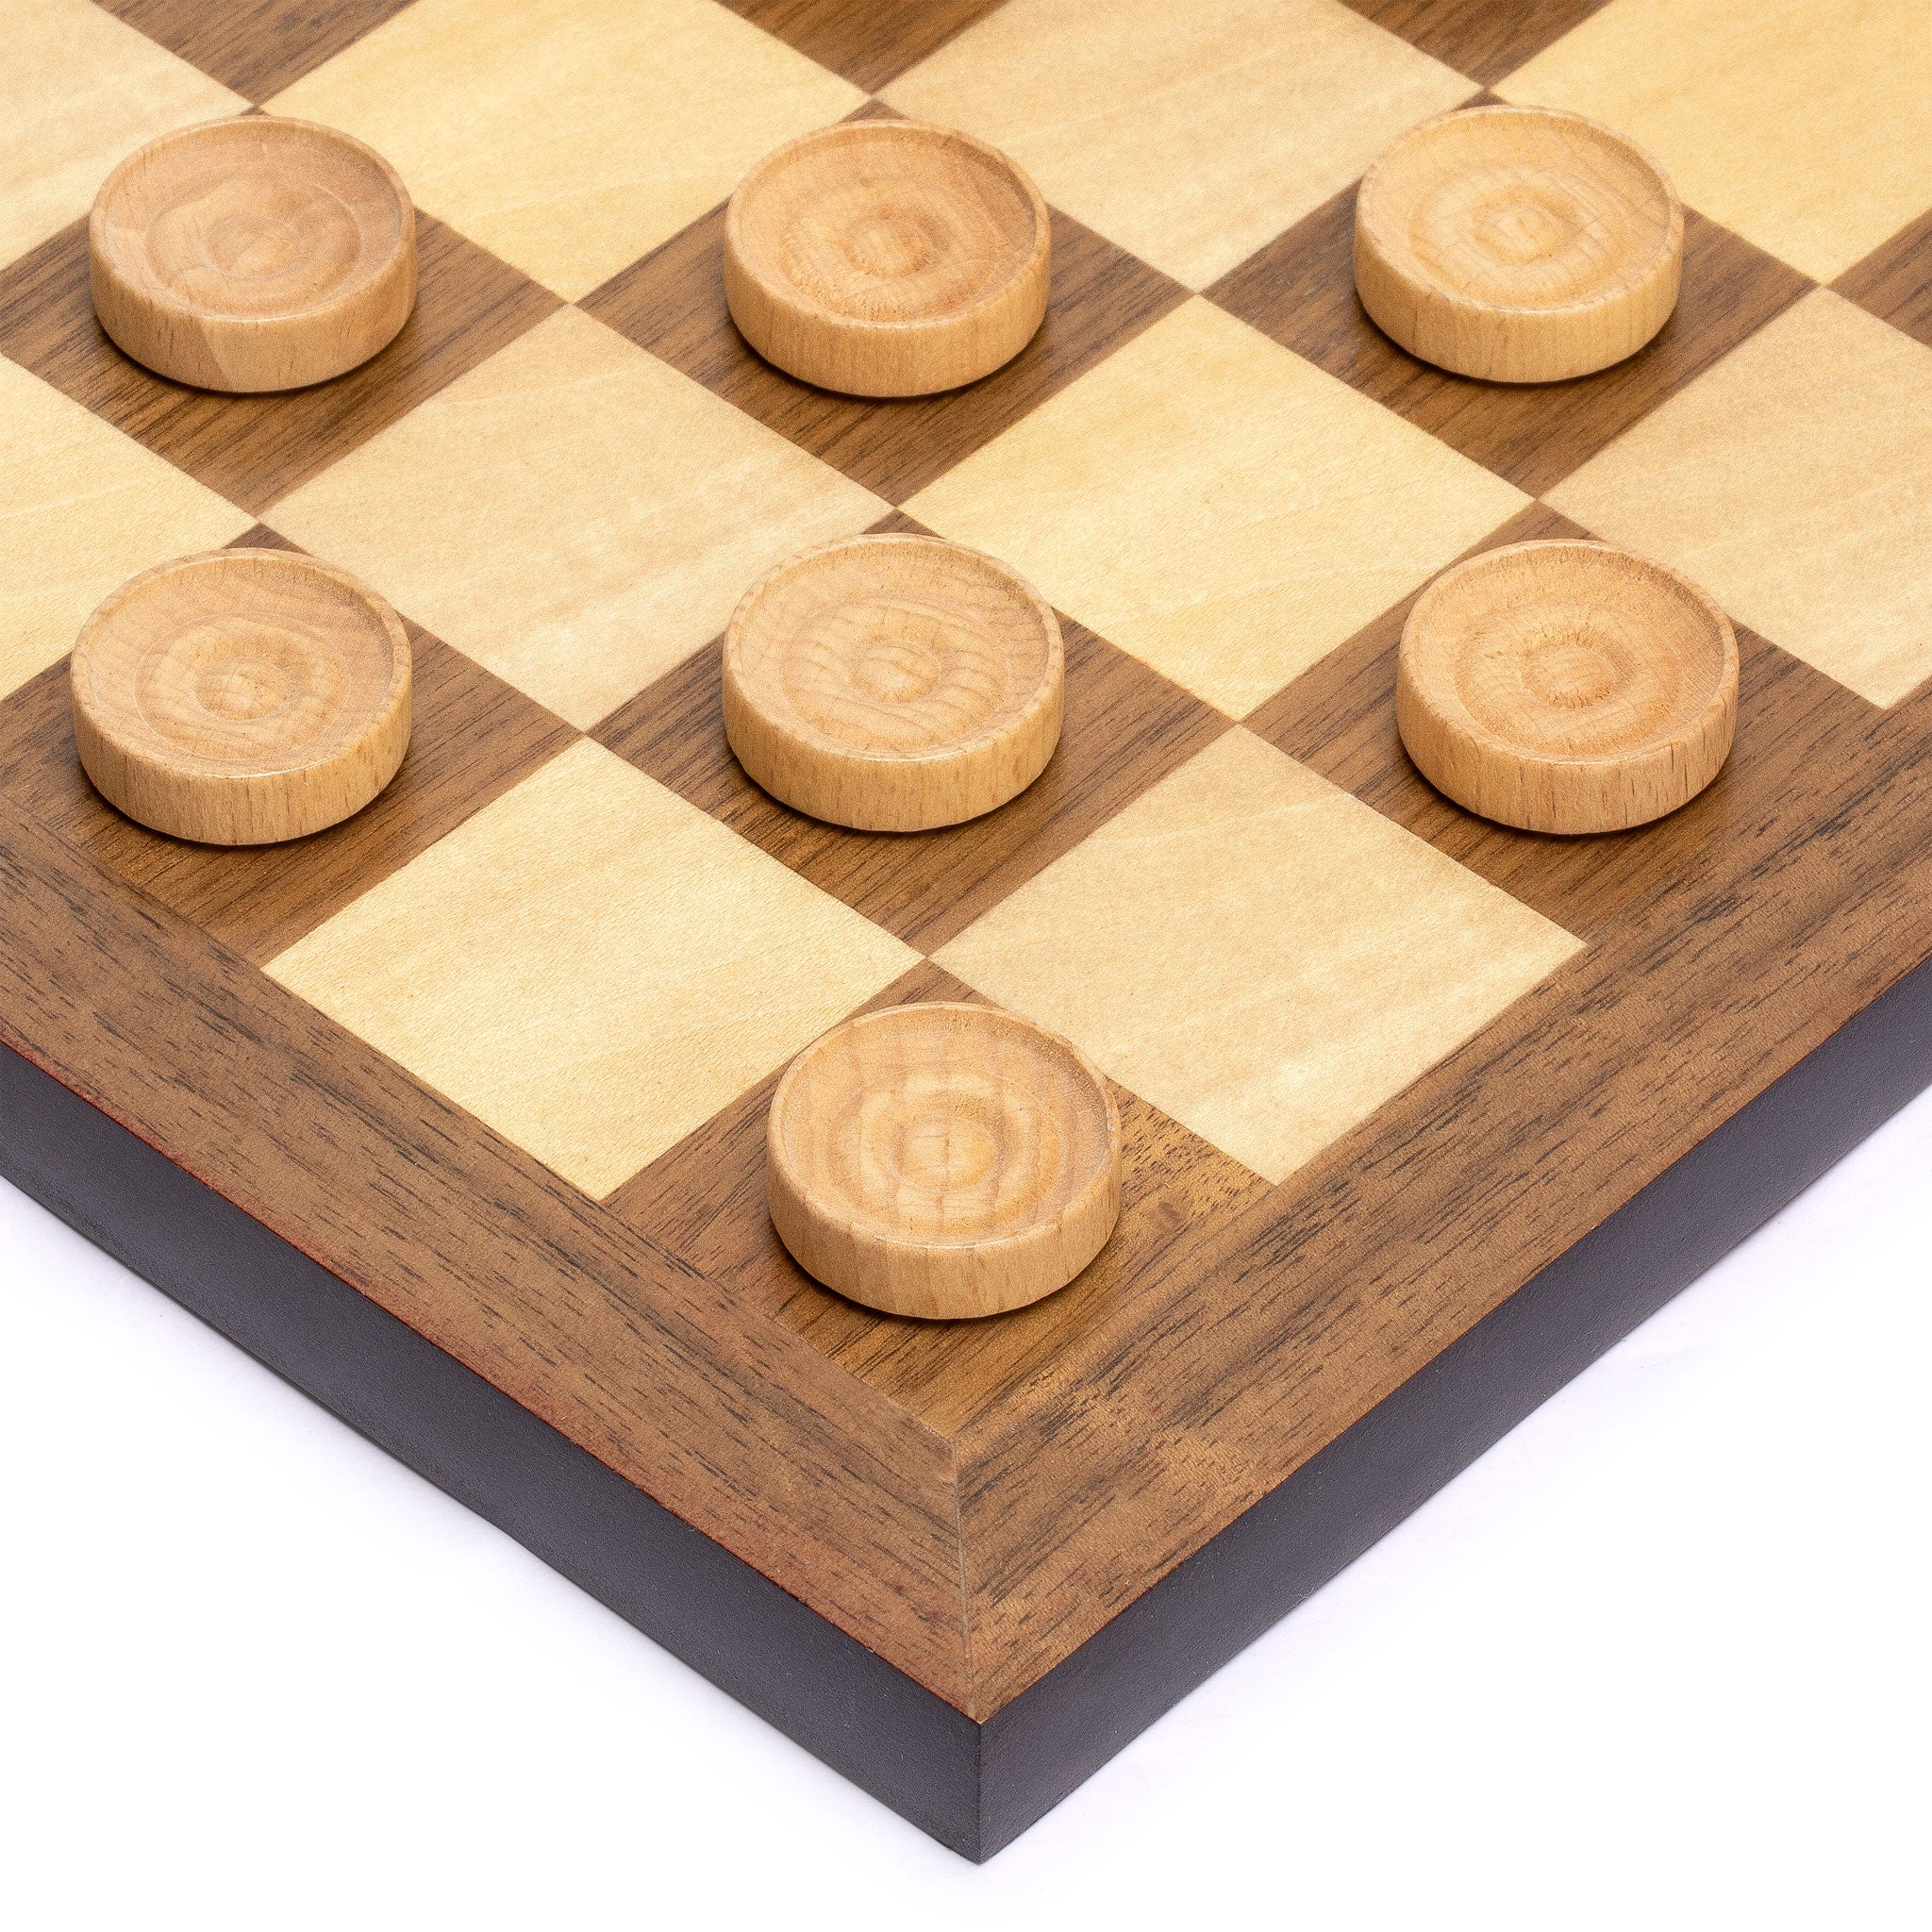 Husaria Reversible Checkers and Draughts Wooden Game Set - 10x10 and 8x8 Board